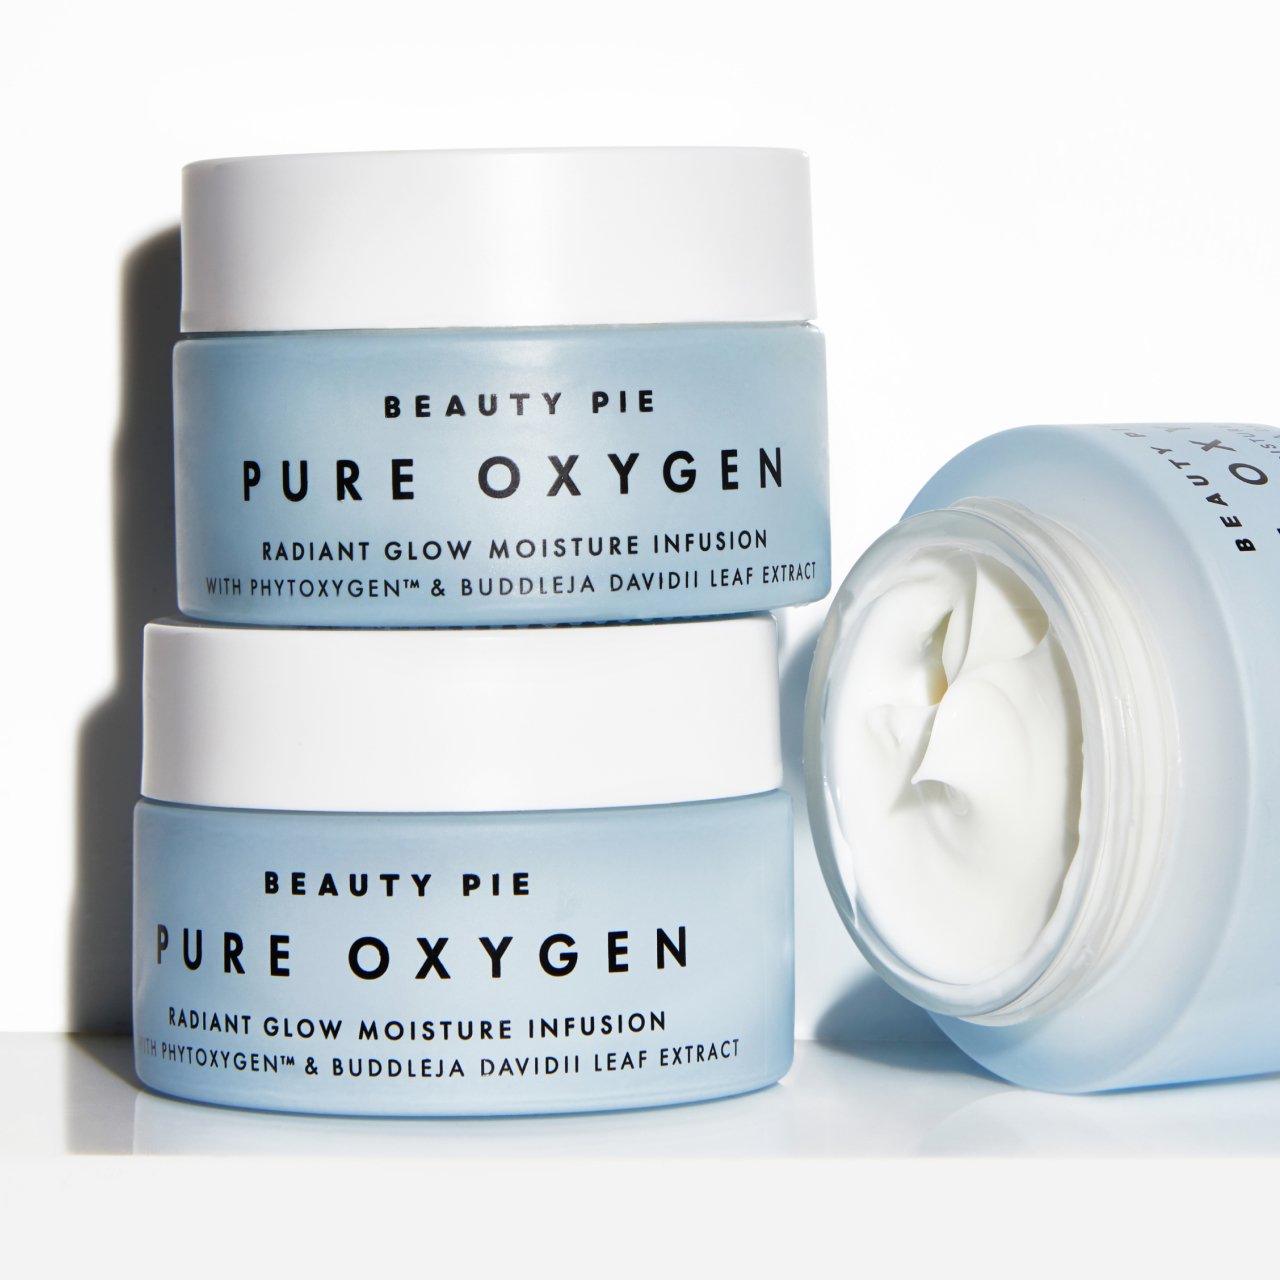 Pure Oxygen Radiant Glow Moisture Infusion